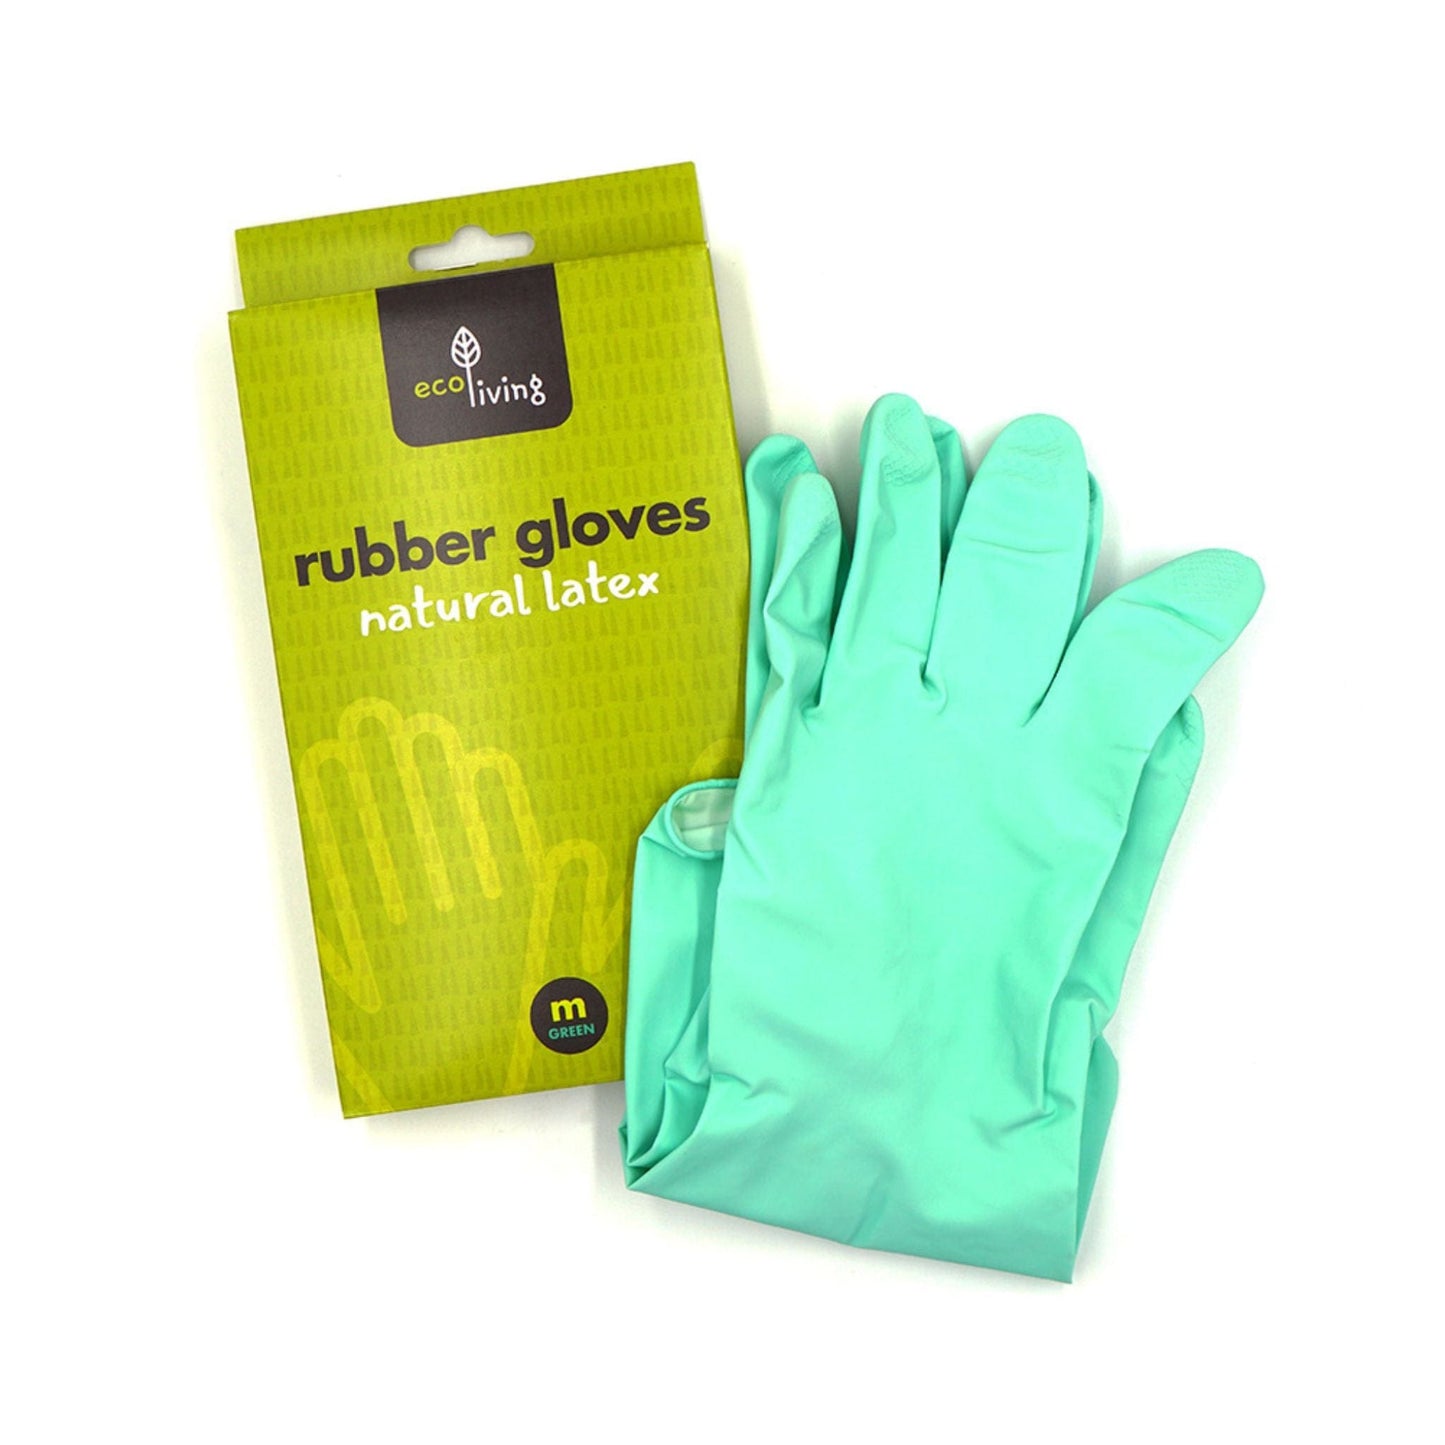 ecoLiving Dishwasher Cleaners Natural Laex Rubber Gloves - Green - Ecoliving